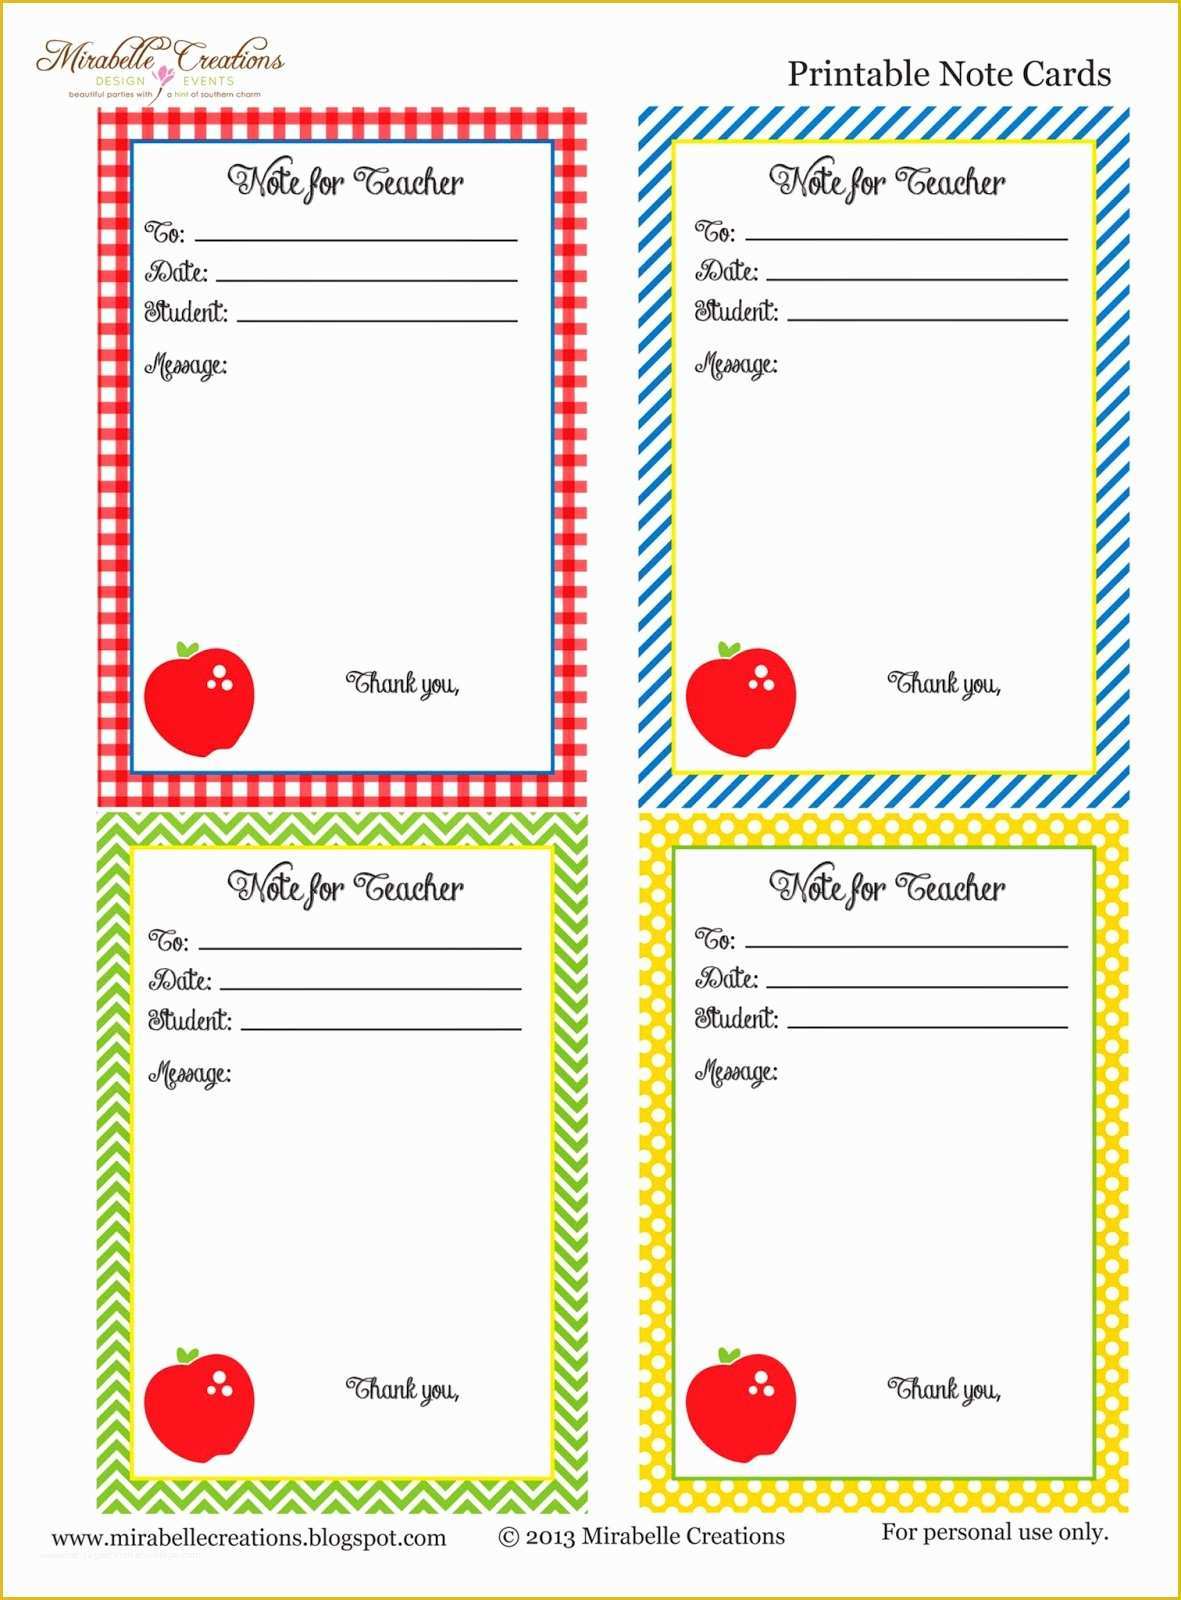 Free Printable Note Cards Template Of Back to School Free Printable Note for Teacher Cards